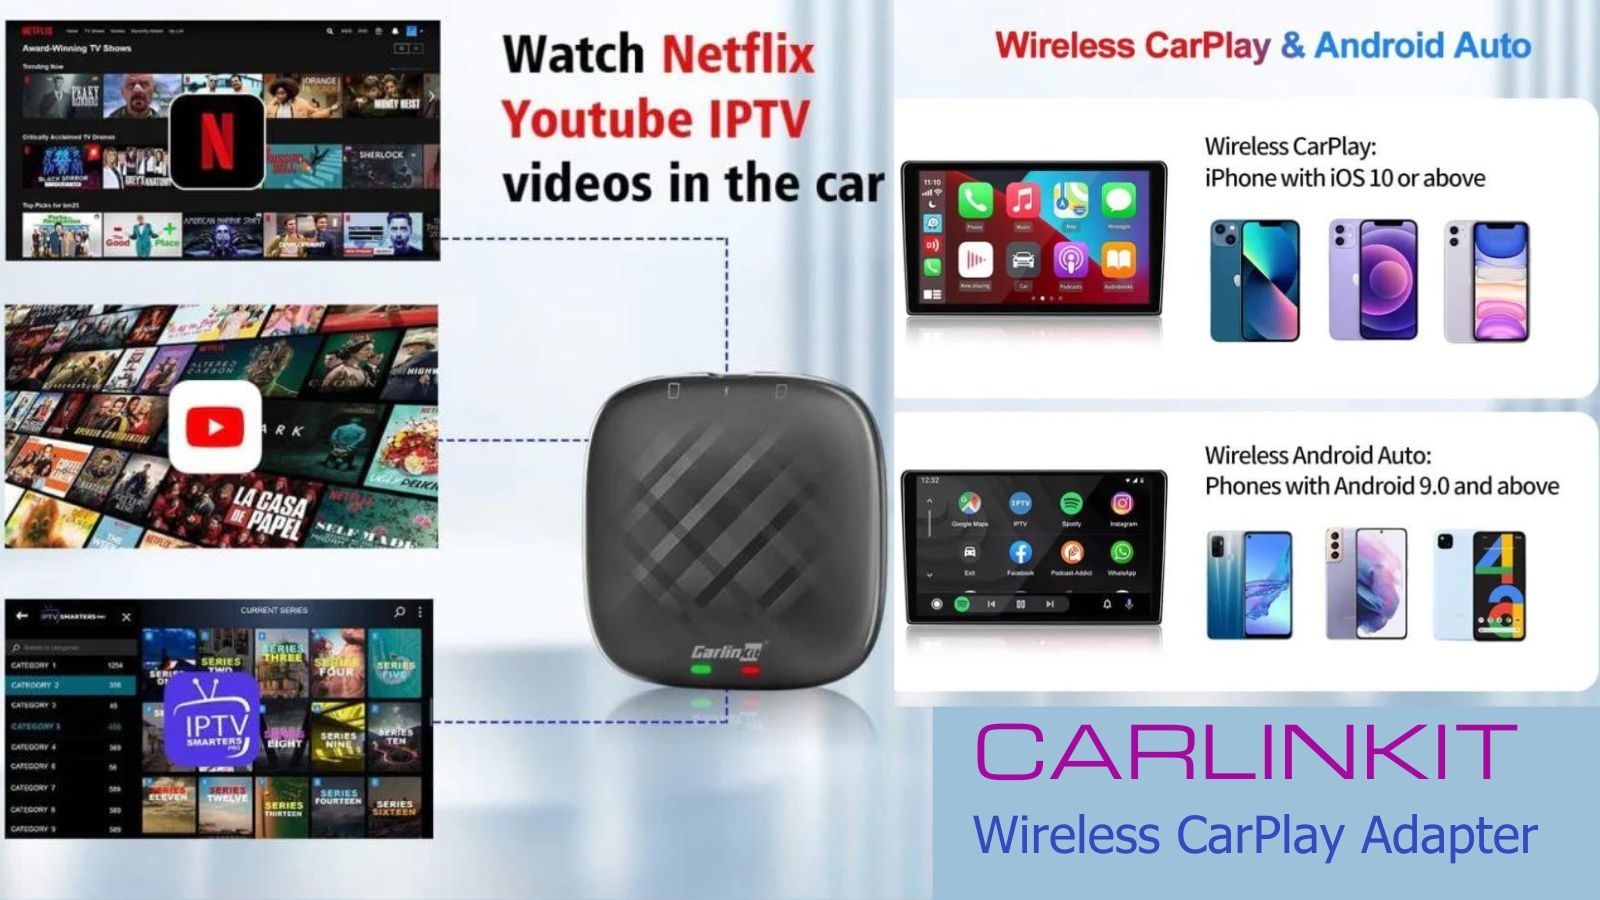 Carlinklit Wireless Carplay Adapter for Netflix and Youtube Video streaming